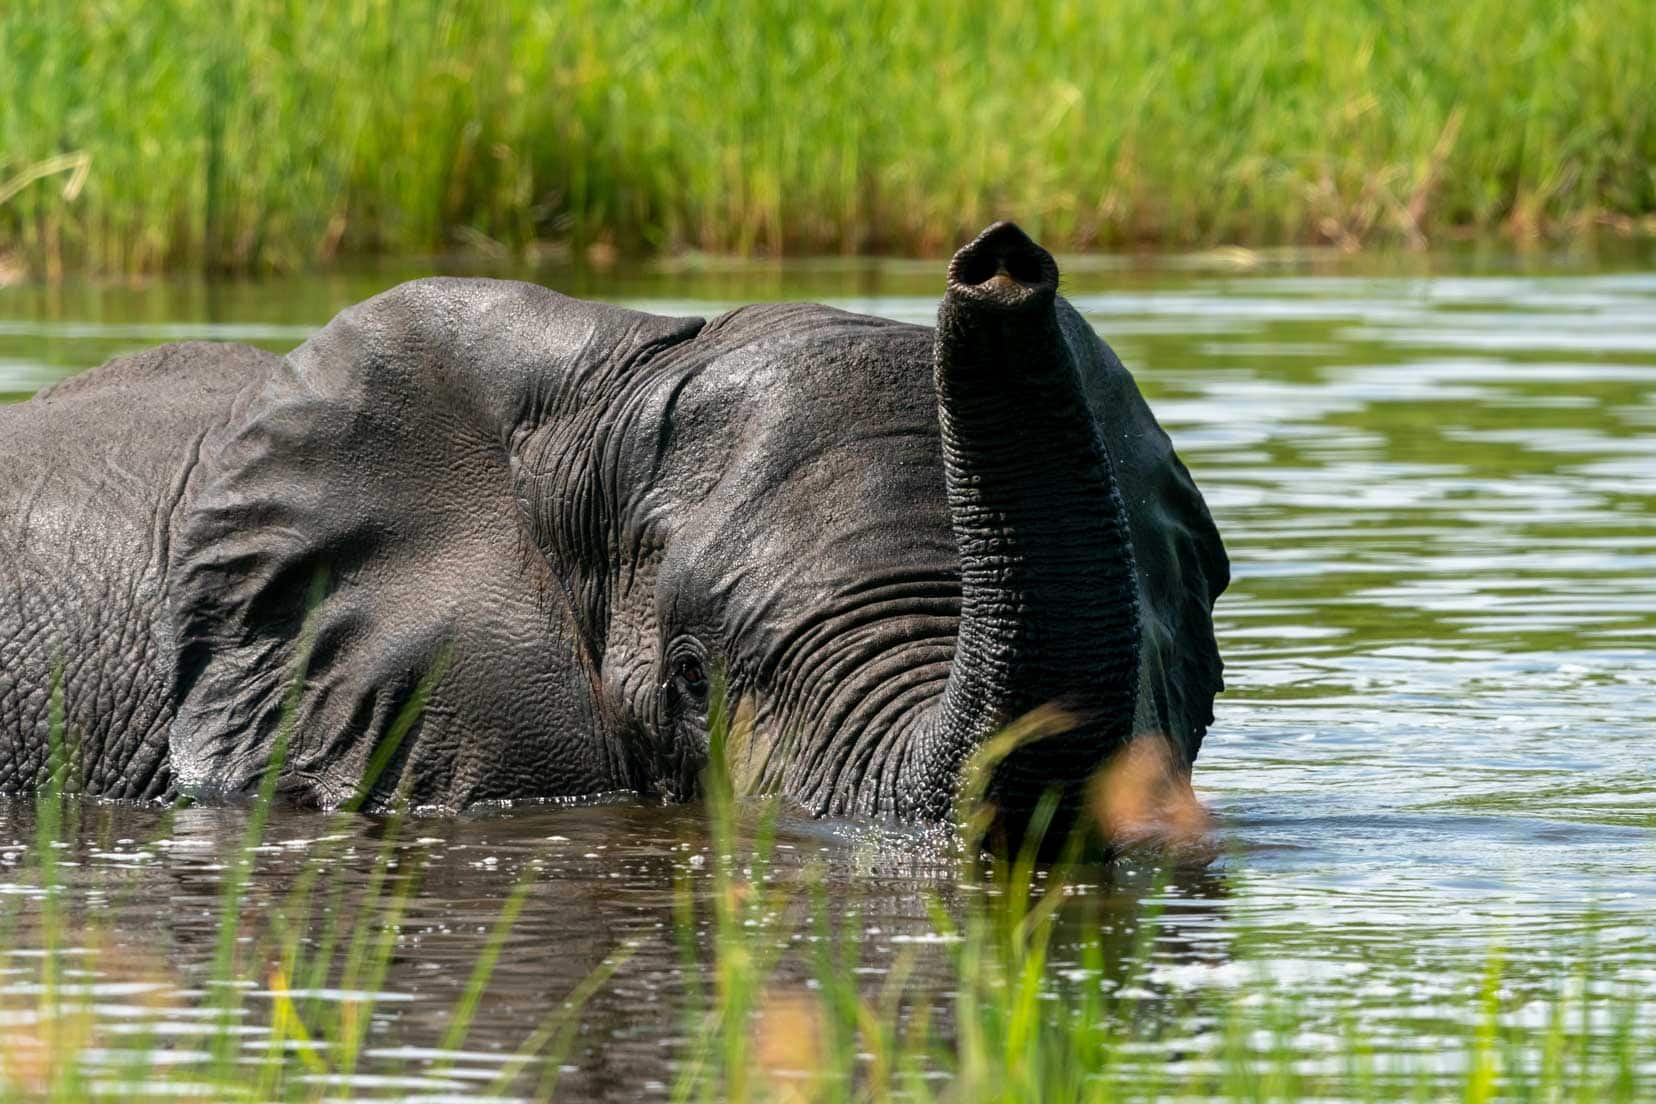 Elephant in river with just head and trunk showing